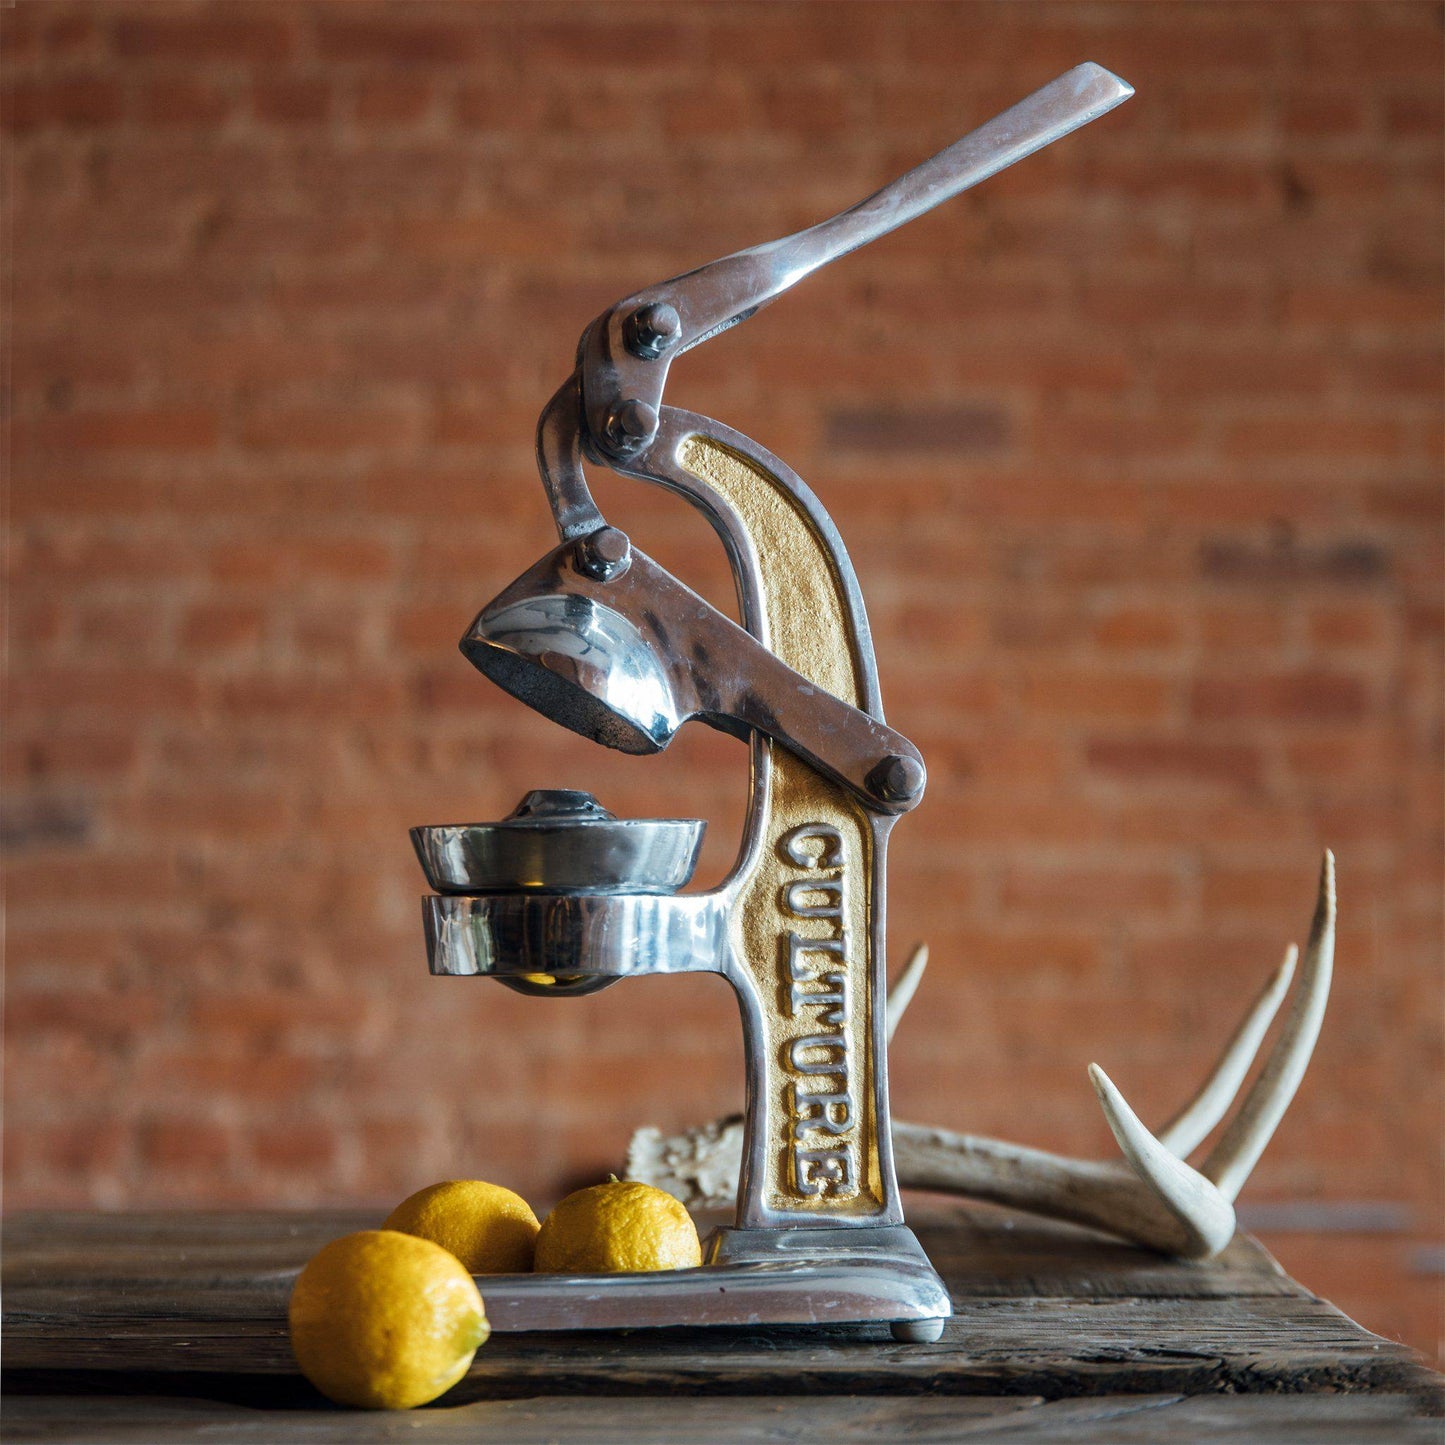 Mexican citrus juicer. Cast from aluminum in Mexico. 